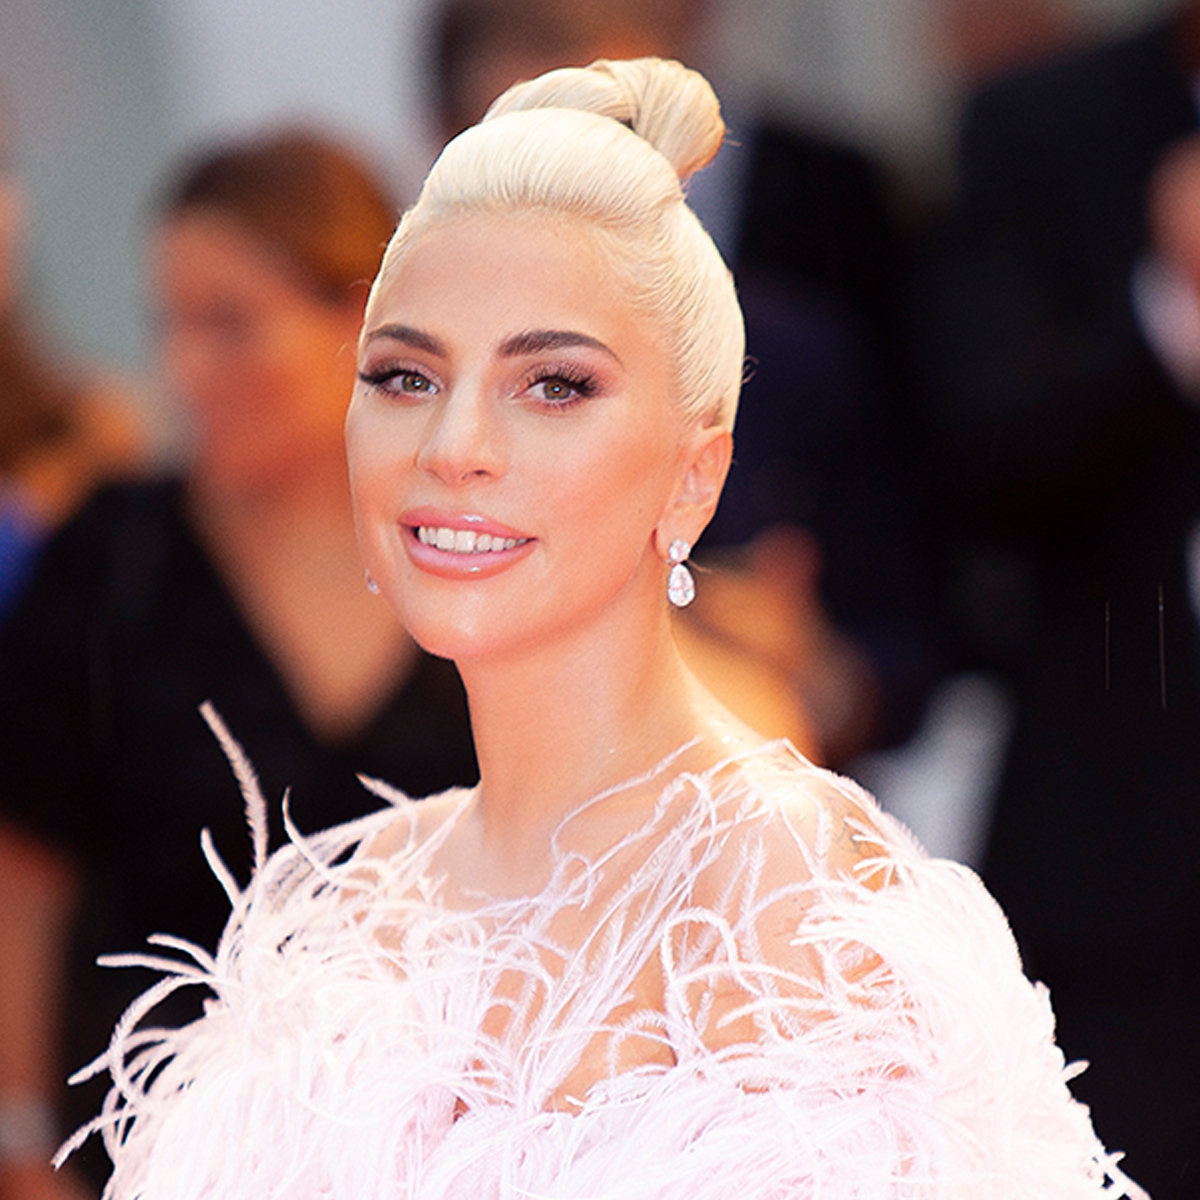 Lady Gaga Says Her Beauty Routine 'Has Been a Healing Practice for Me